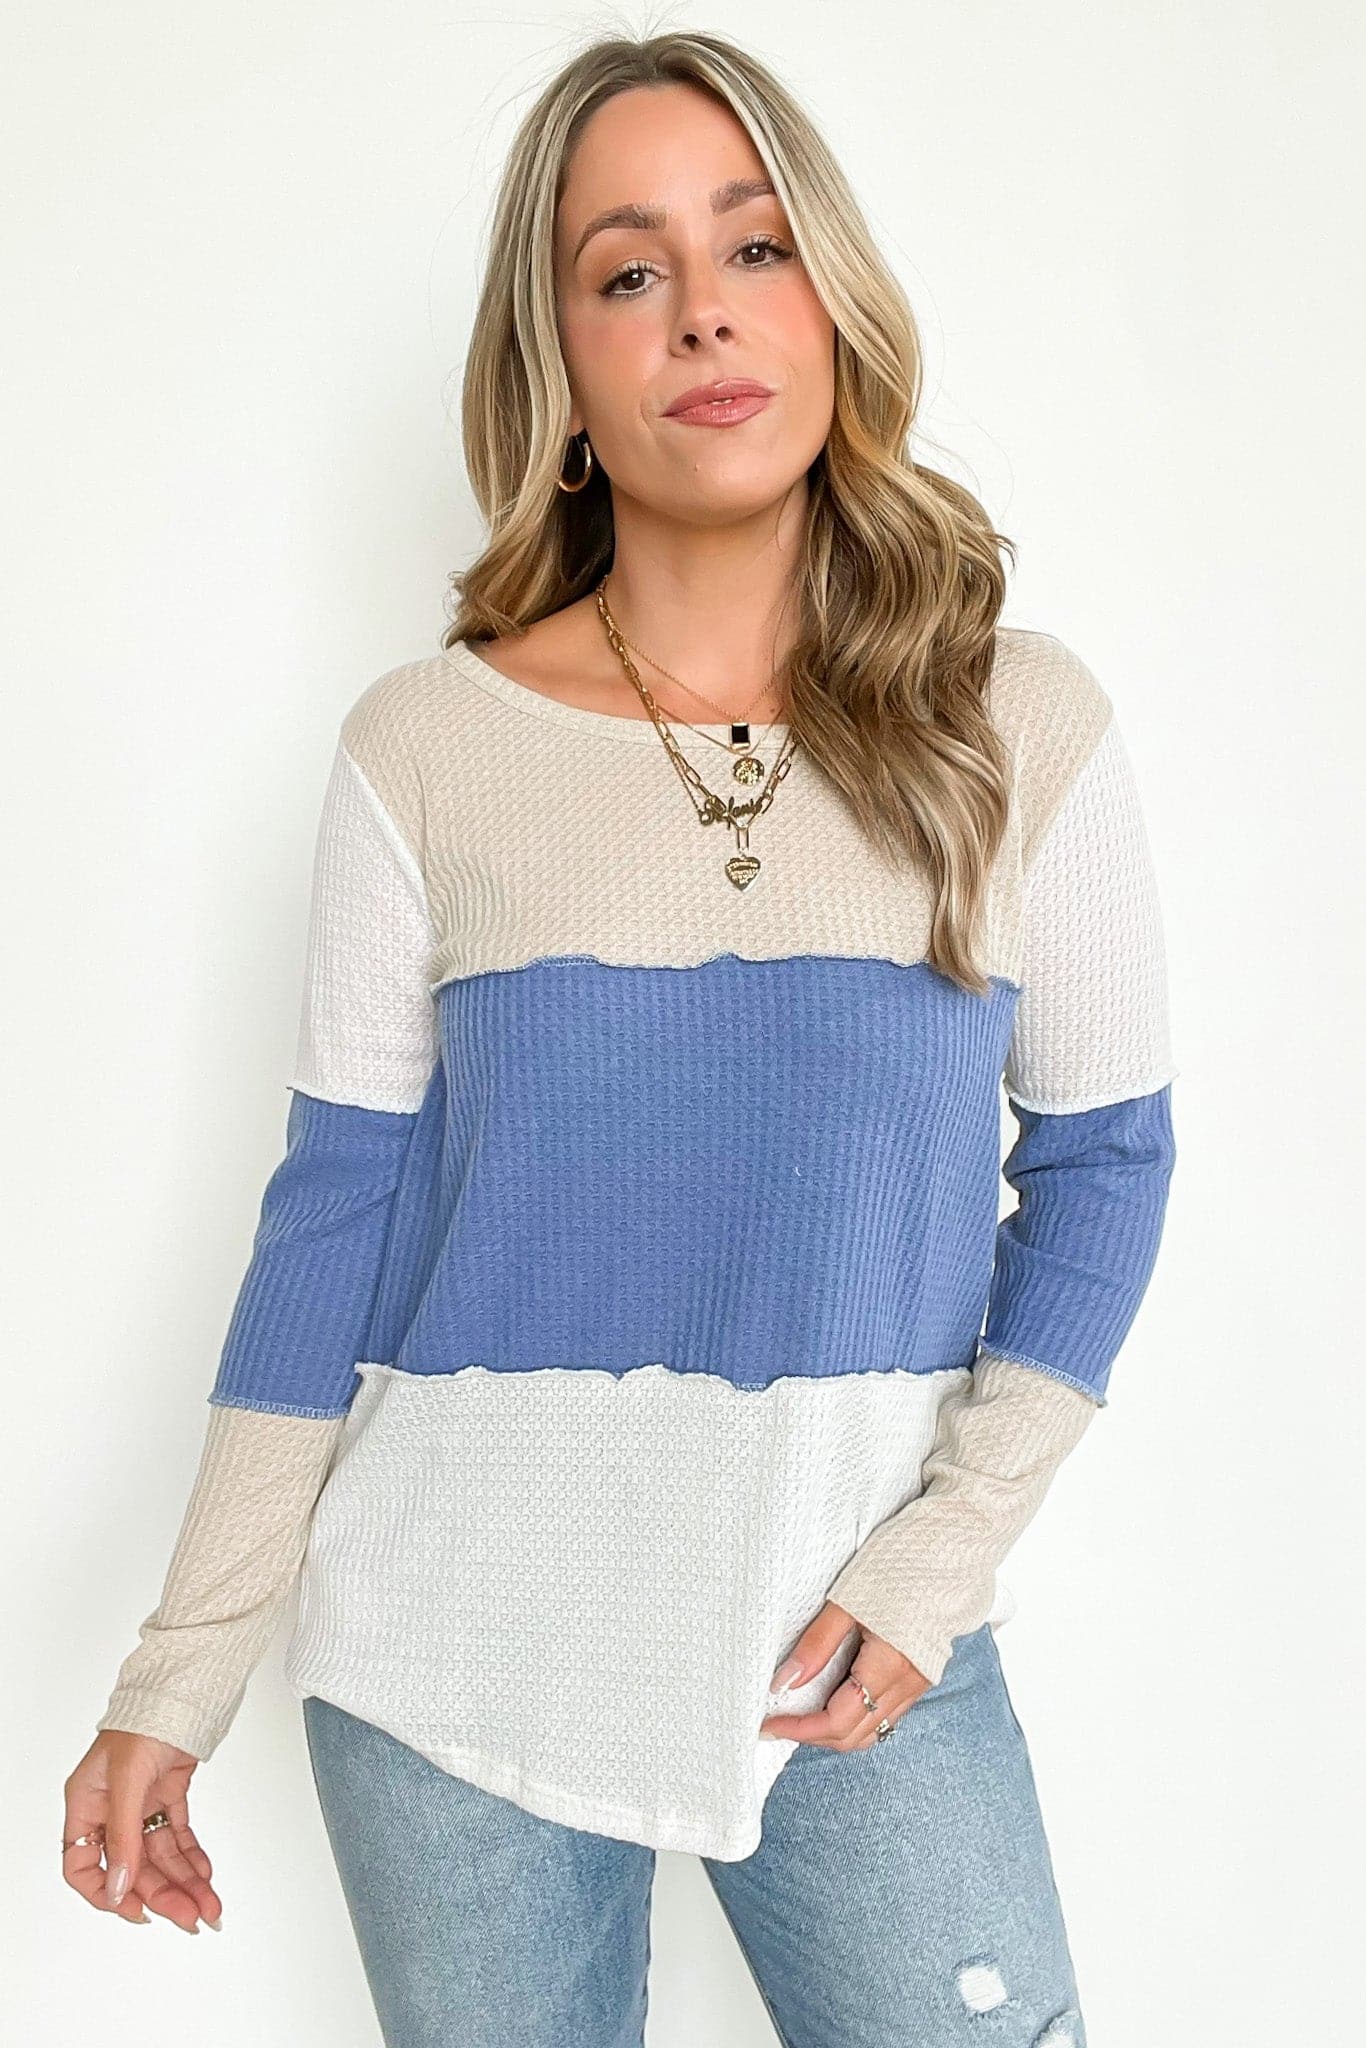  Sarabeth Color Block Waffle Knit Top - FINAL SALE - Madison and Mallory